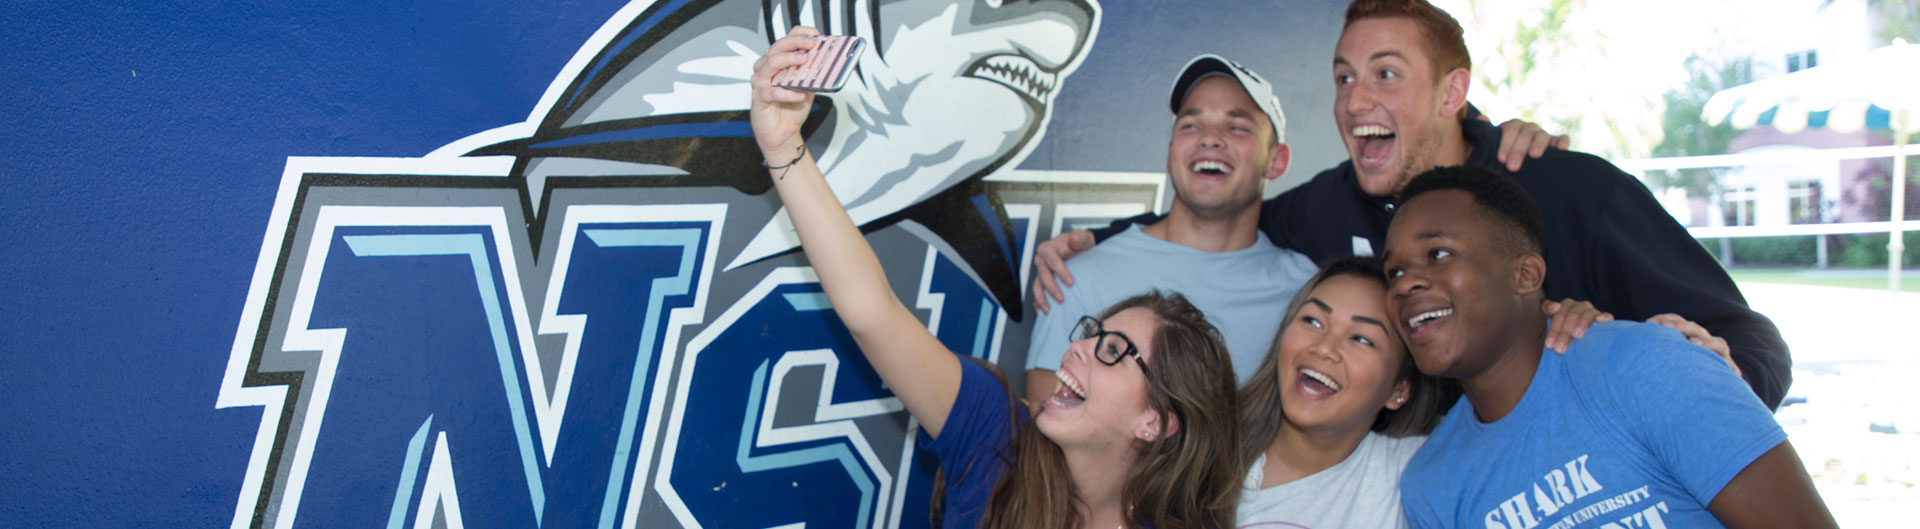 students taking a selfie in front of nsu logo